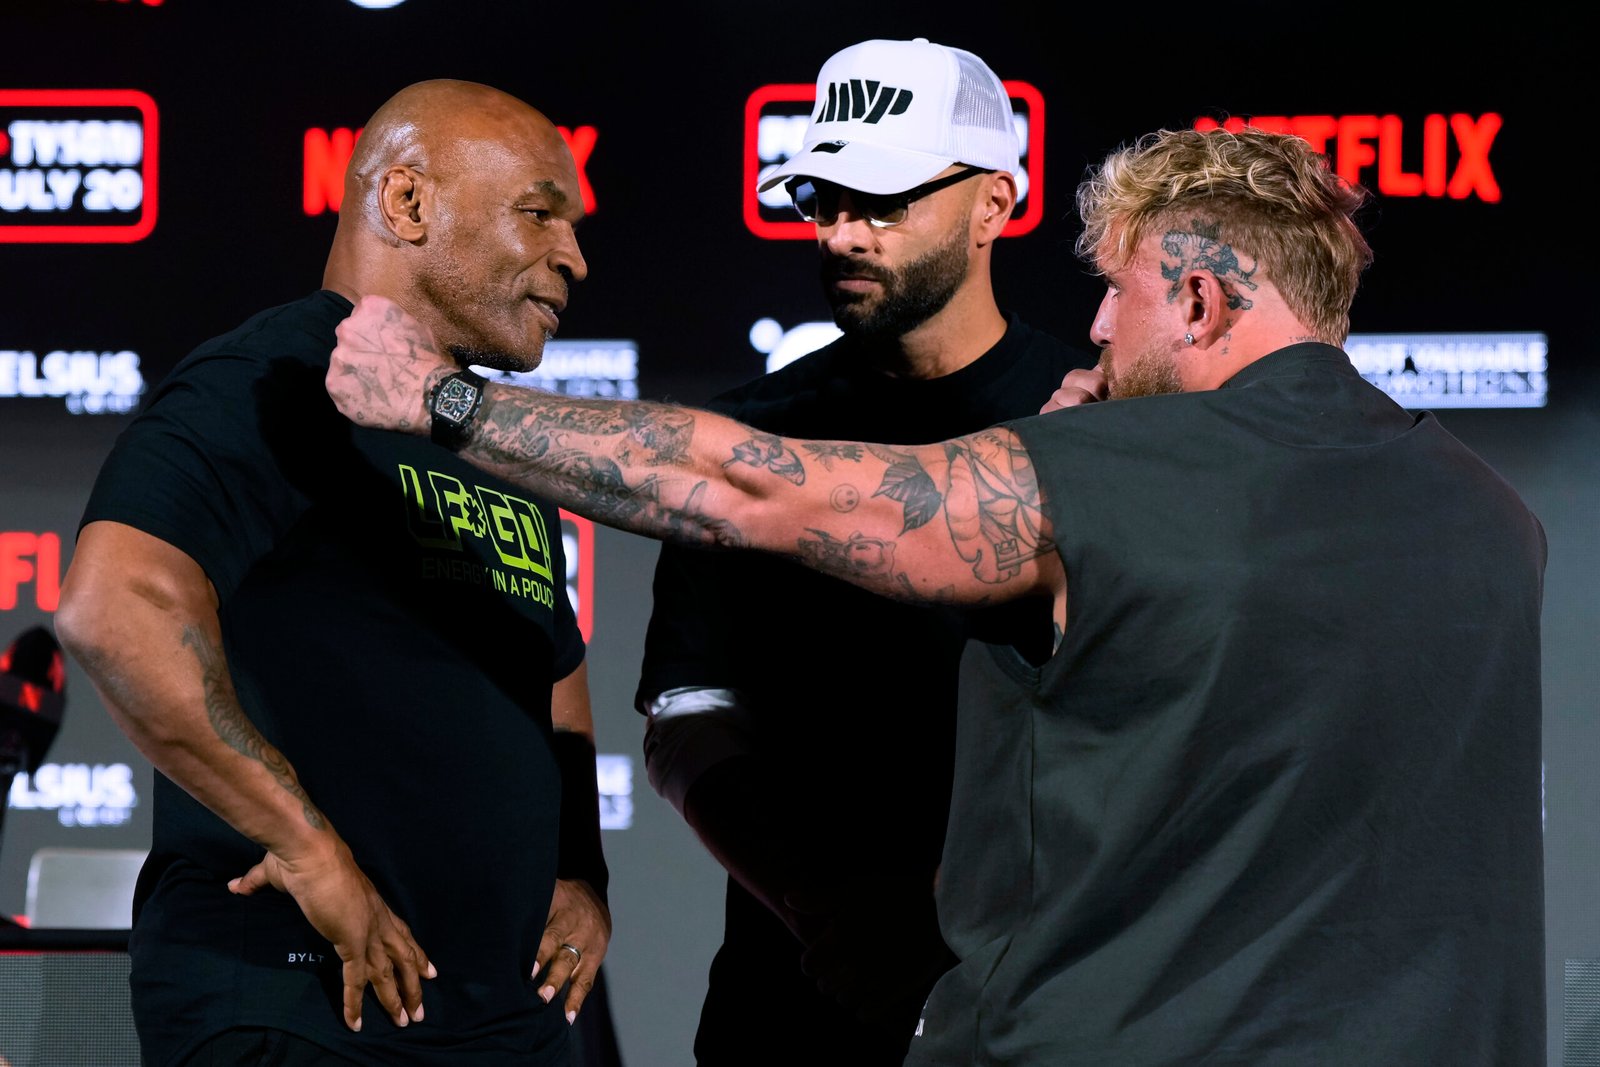 Jake Paul, Mike Tyson trade insults to hype fight in Texas